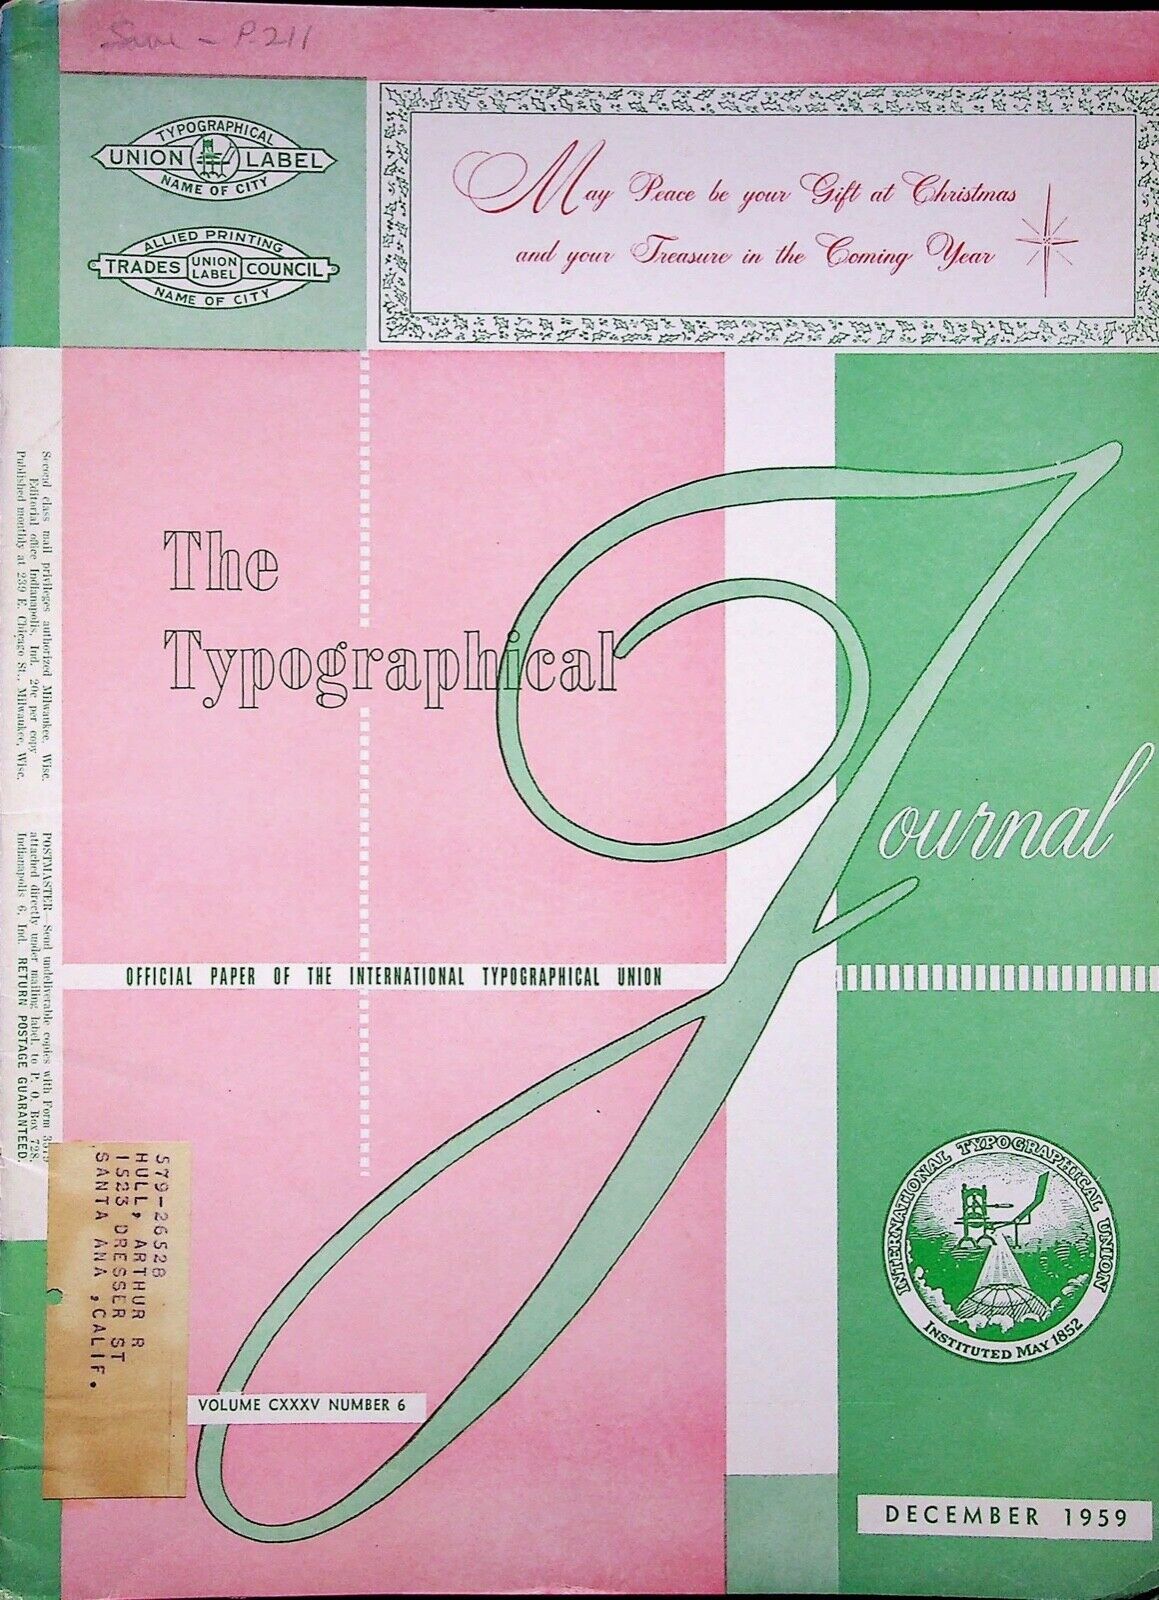 DECEMBER 1959 OFFICIAL PAPER OF THE INTERNATIONAL IYPOGRAPHICAL UNION CATALOG